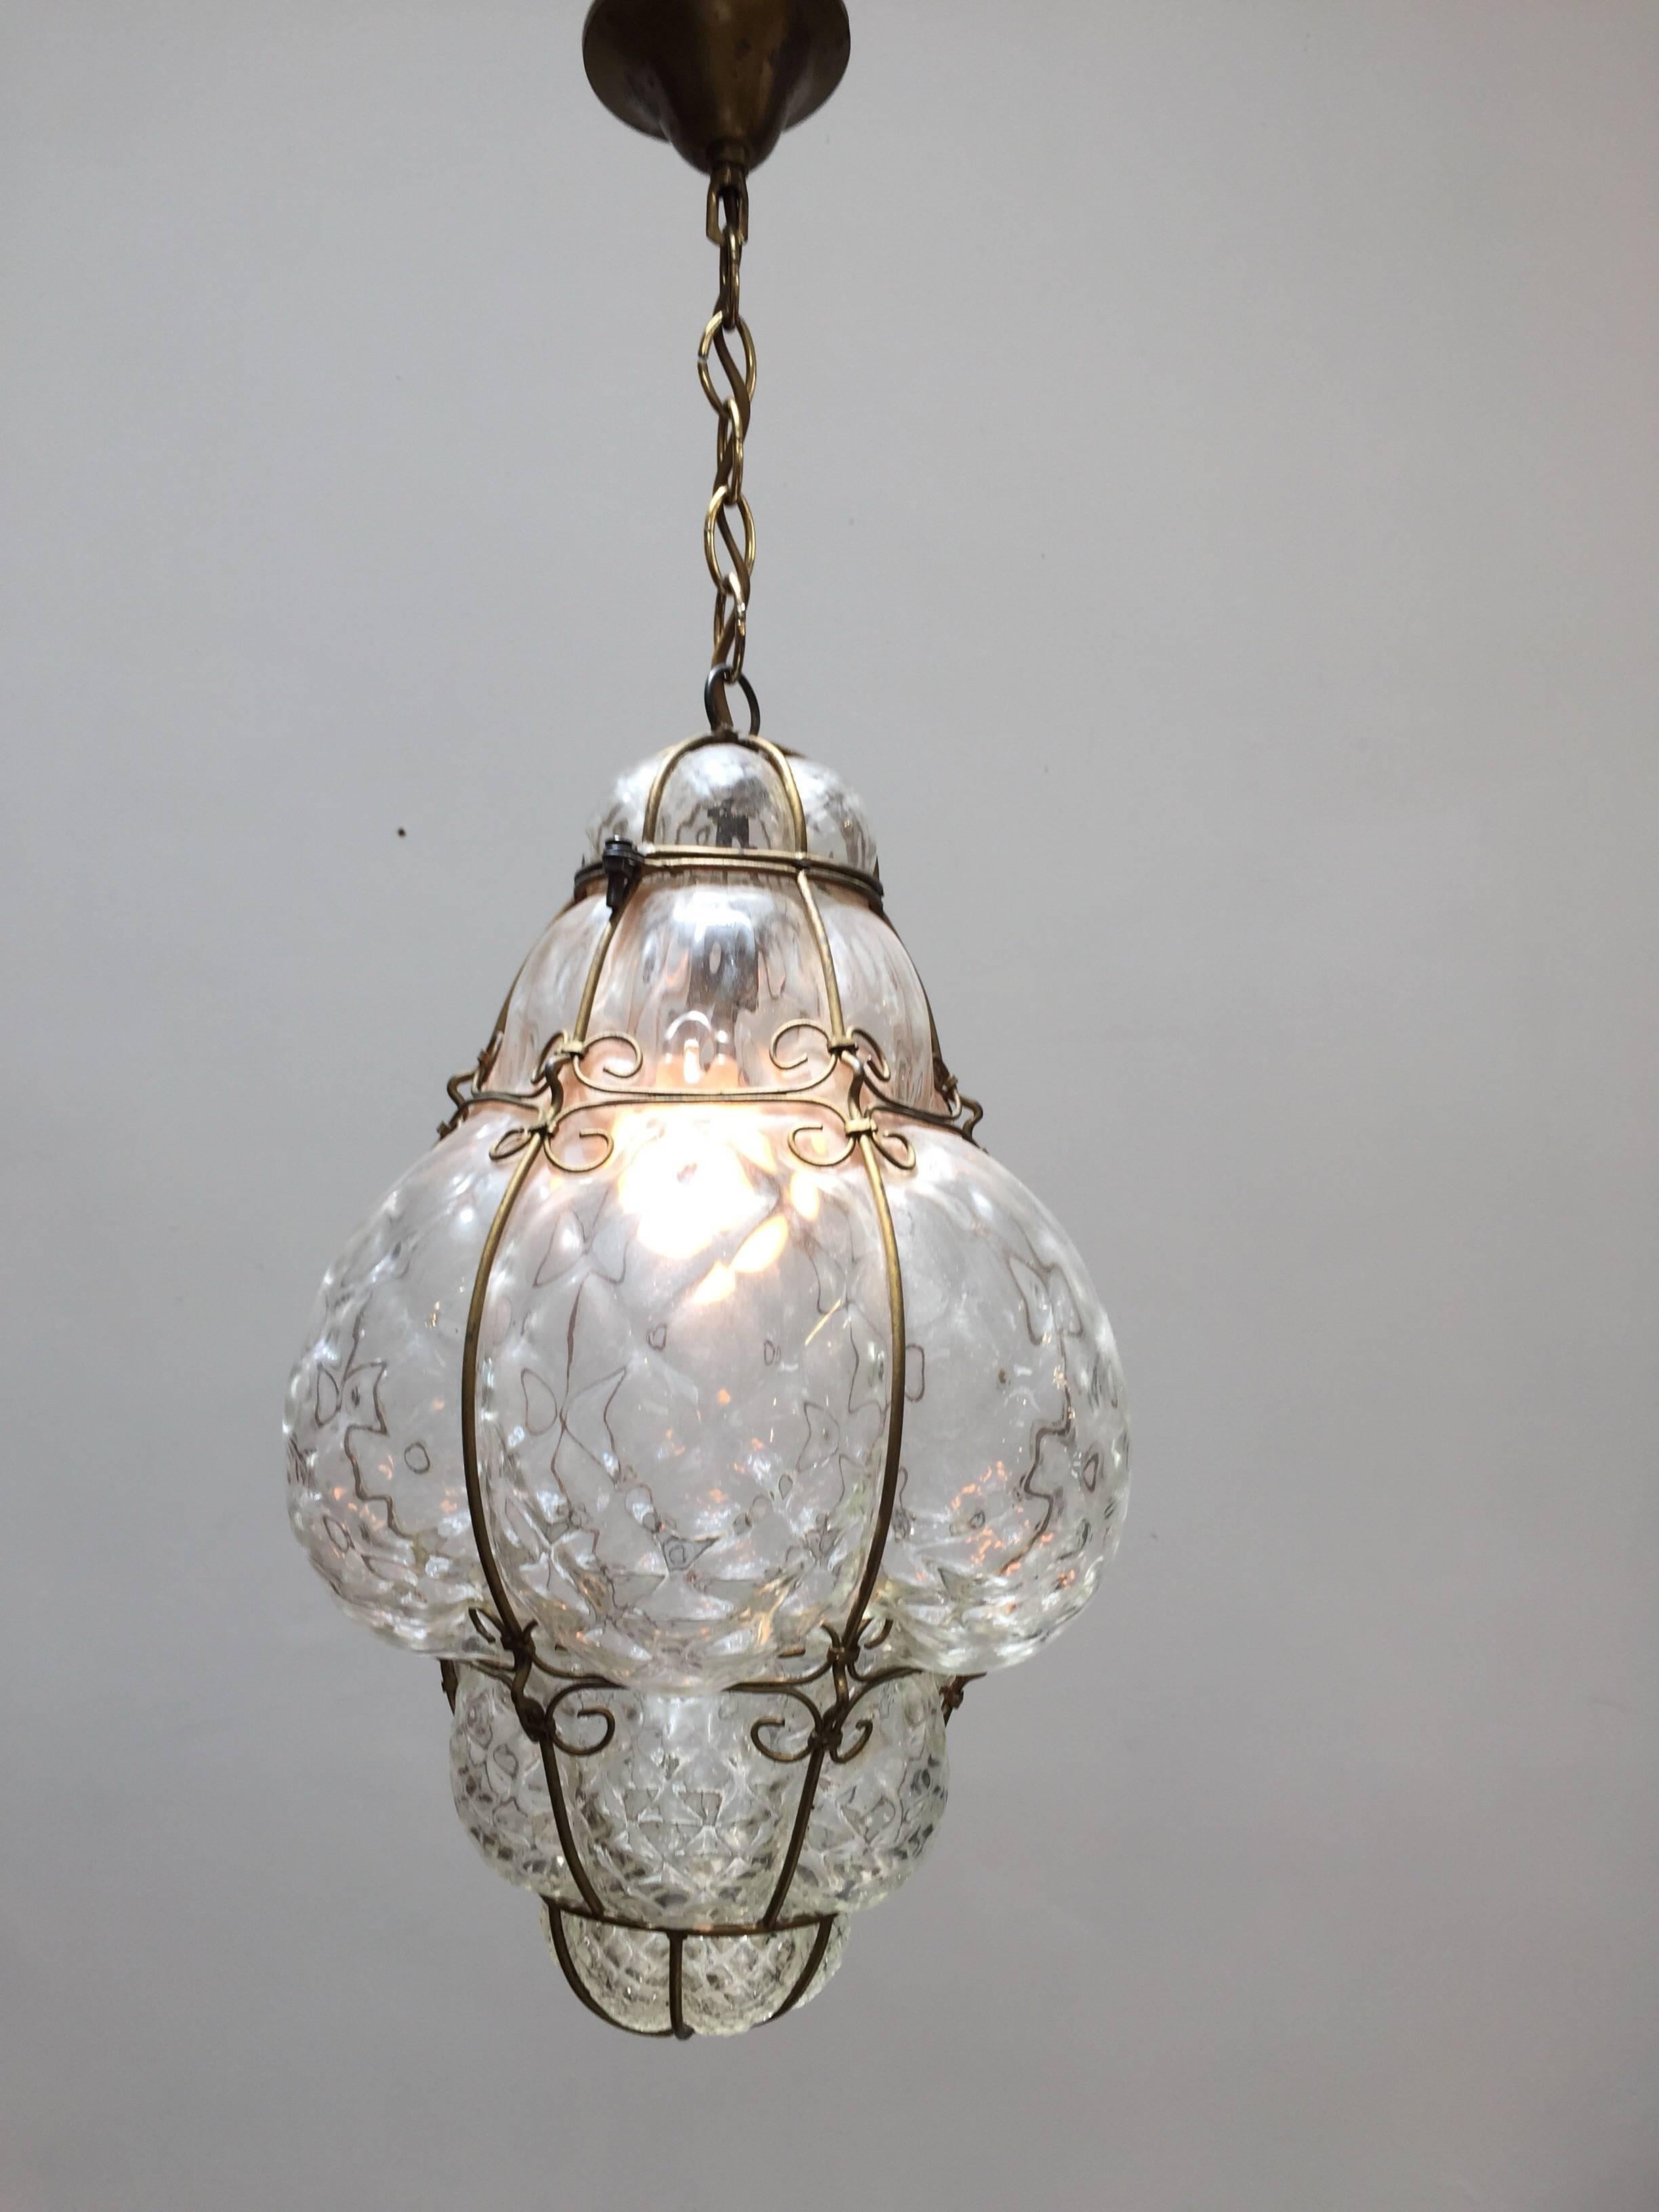 Gorgeous vintage Seguso Murano bubble wire wrapped cage pendant light.
Glass is handblown and wrapped with metal brass.
1940 Seguso Murano bubble glass cage lantern or pendant, oriental Ali Baba style.
It has a 